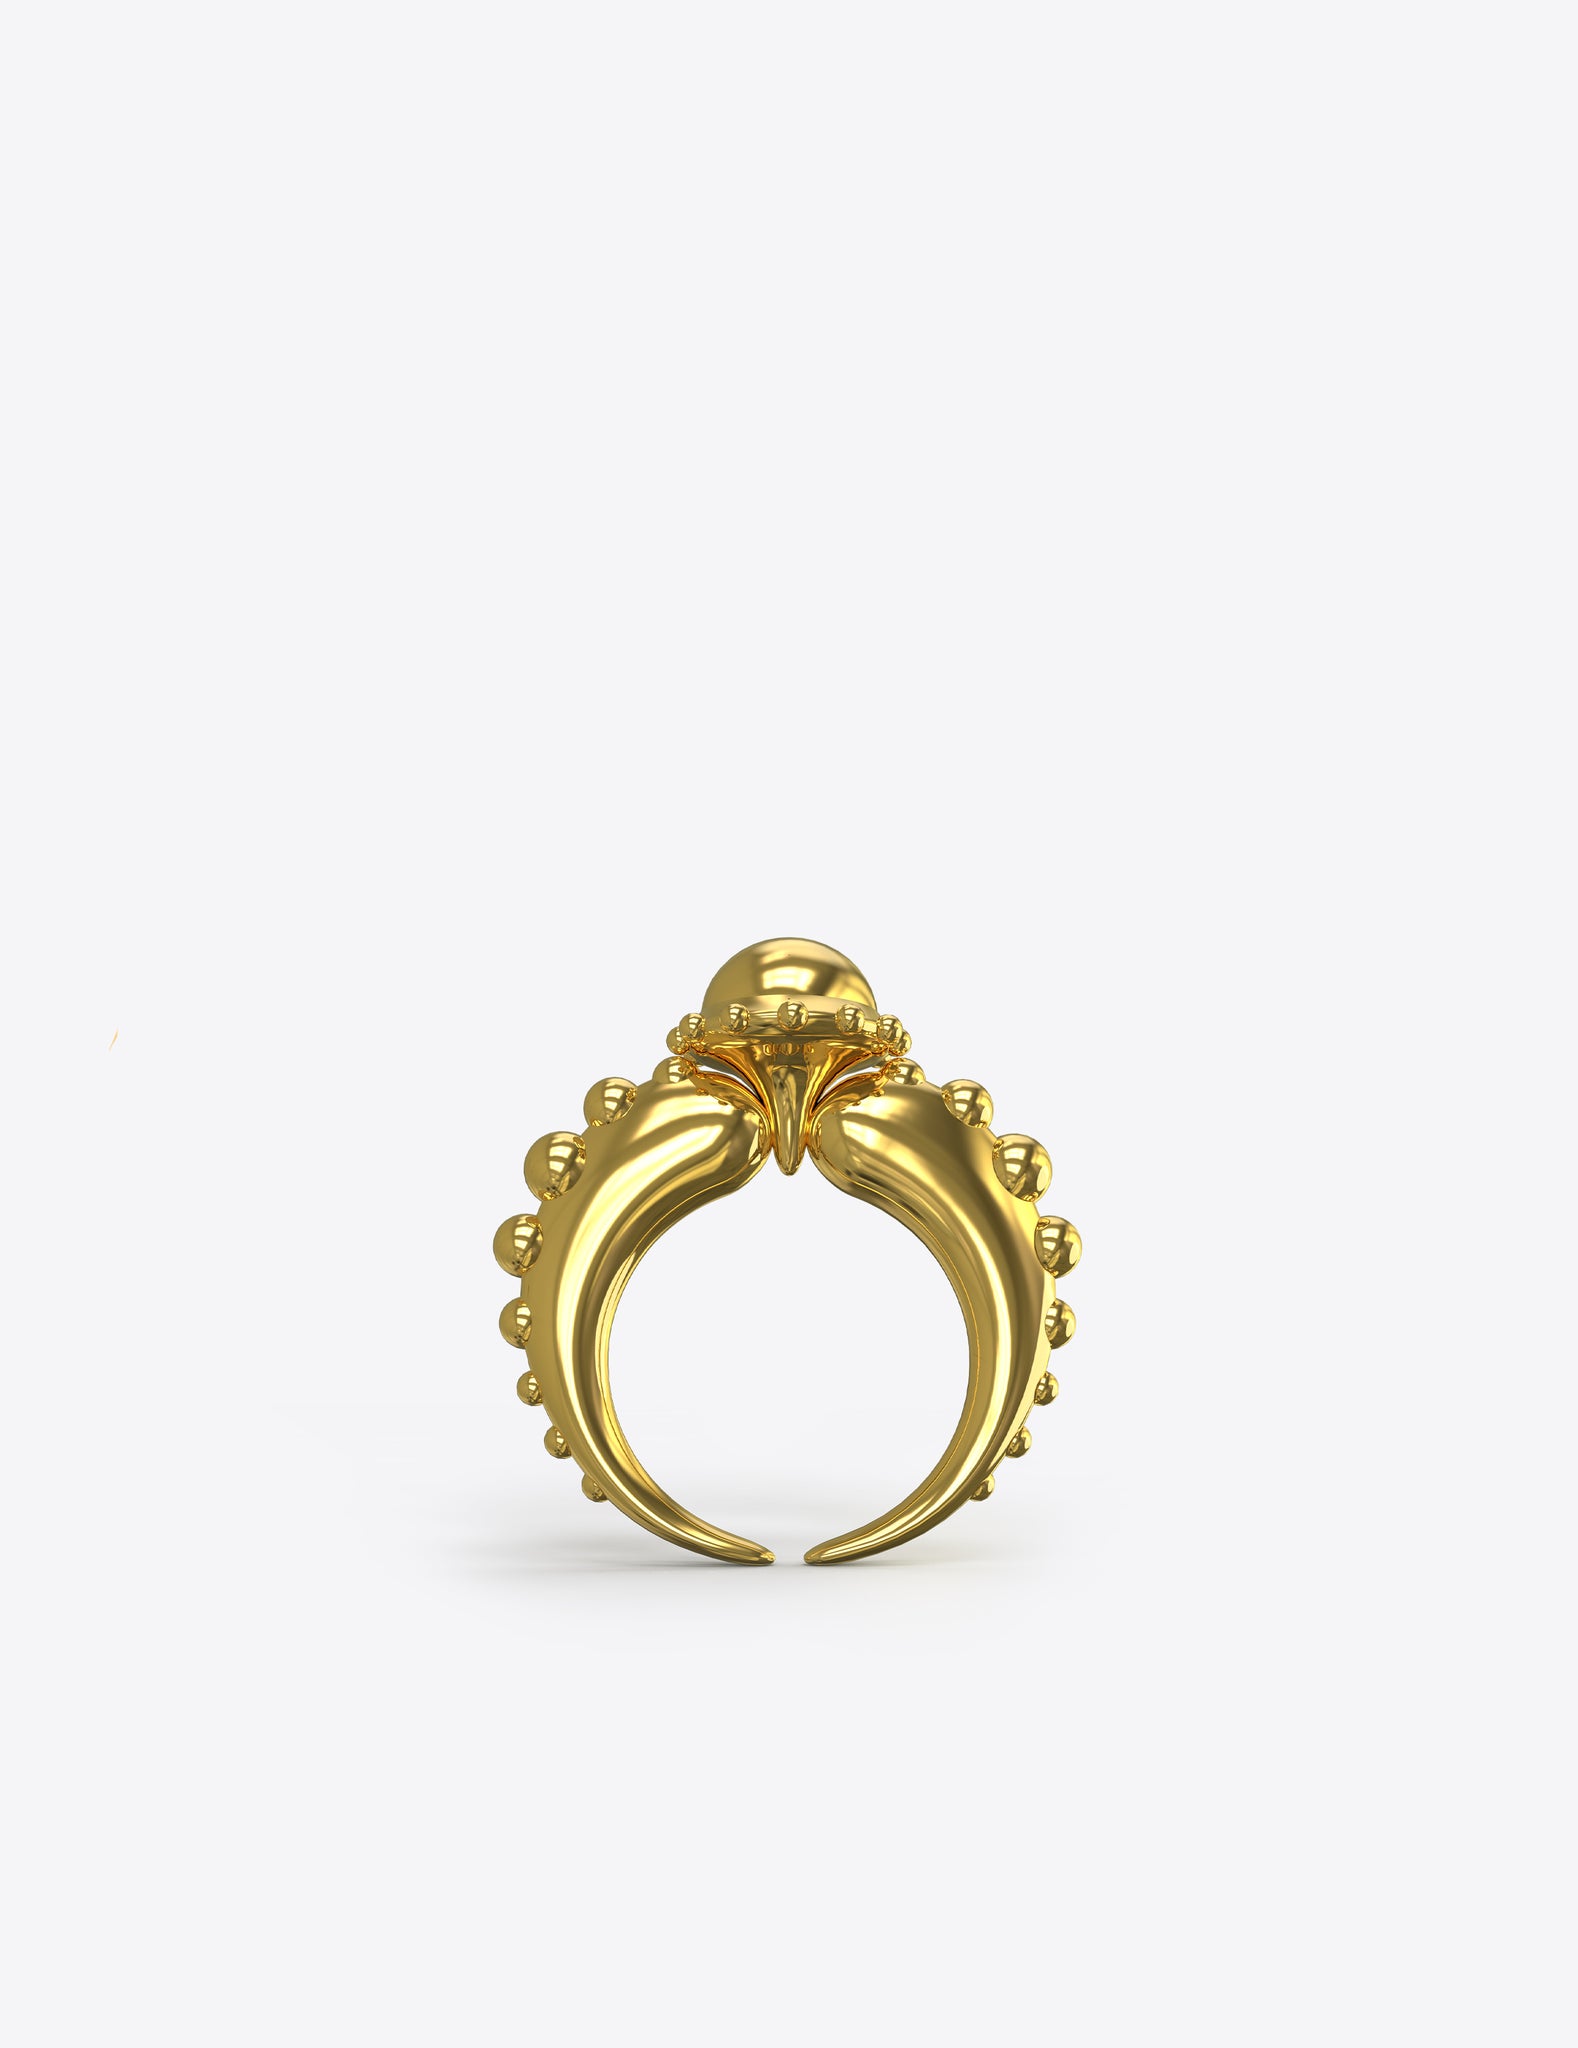 Two Talon Orb Ring in Polished Gold Vermeil